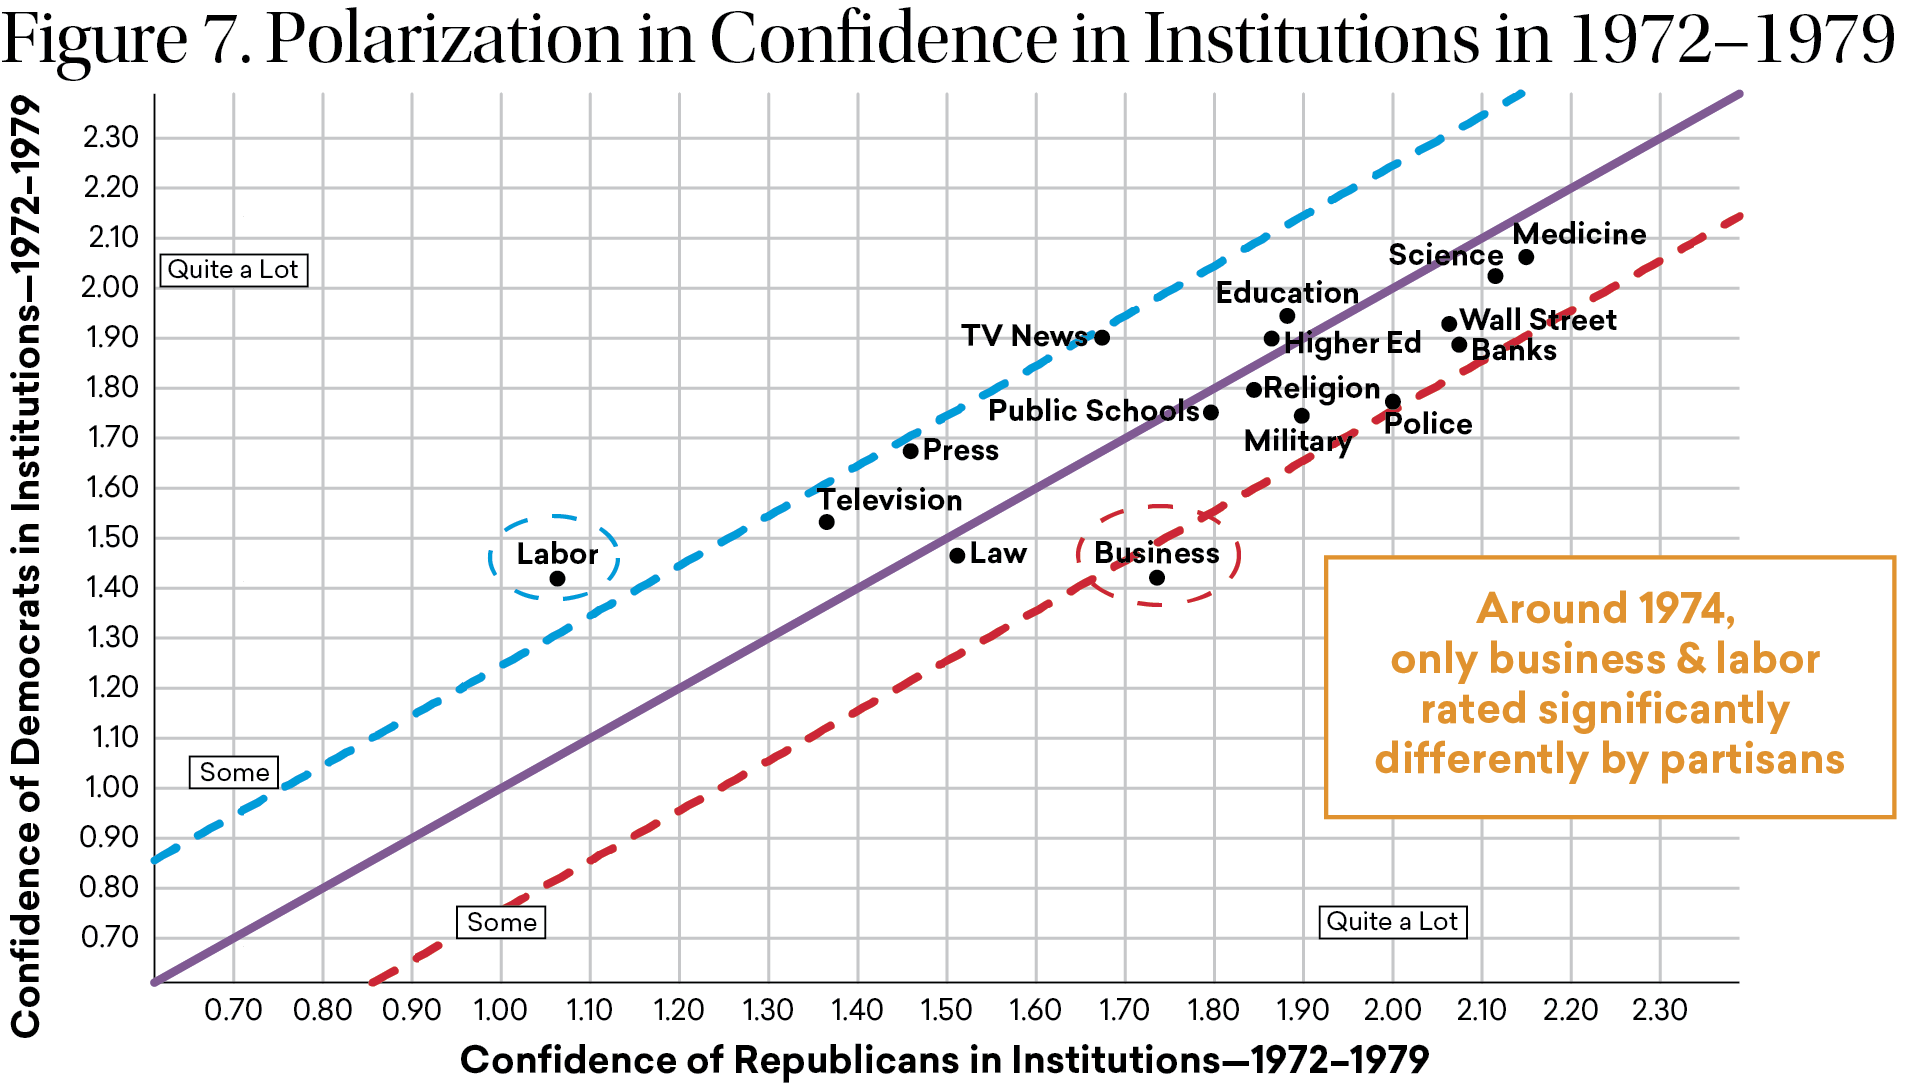 Figure 7: A scatter chart compares the partisan polarization of public confidence in sixteen institutions 1972-1979. Democrats trusted Labor slightly more and distrusted Business slightly less than Republicans during this period.